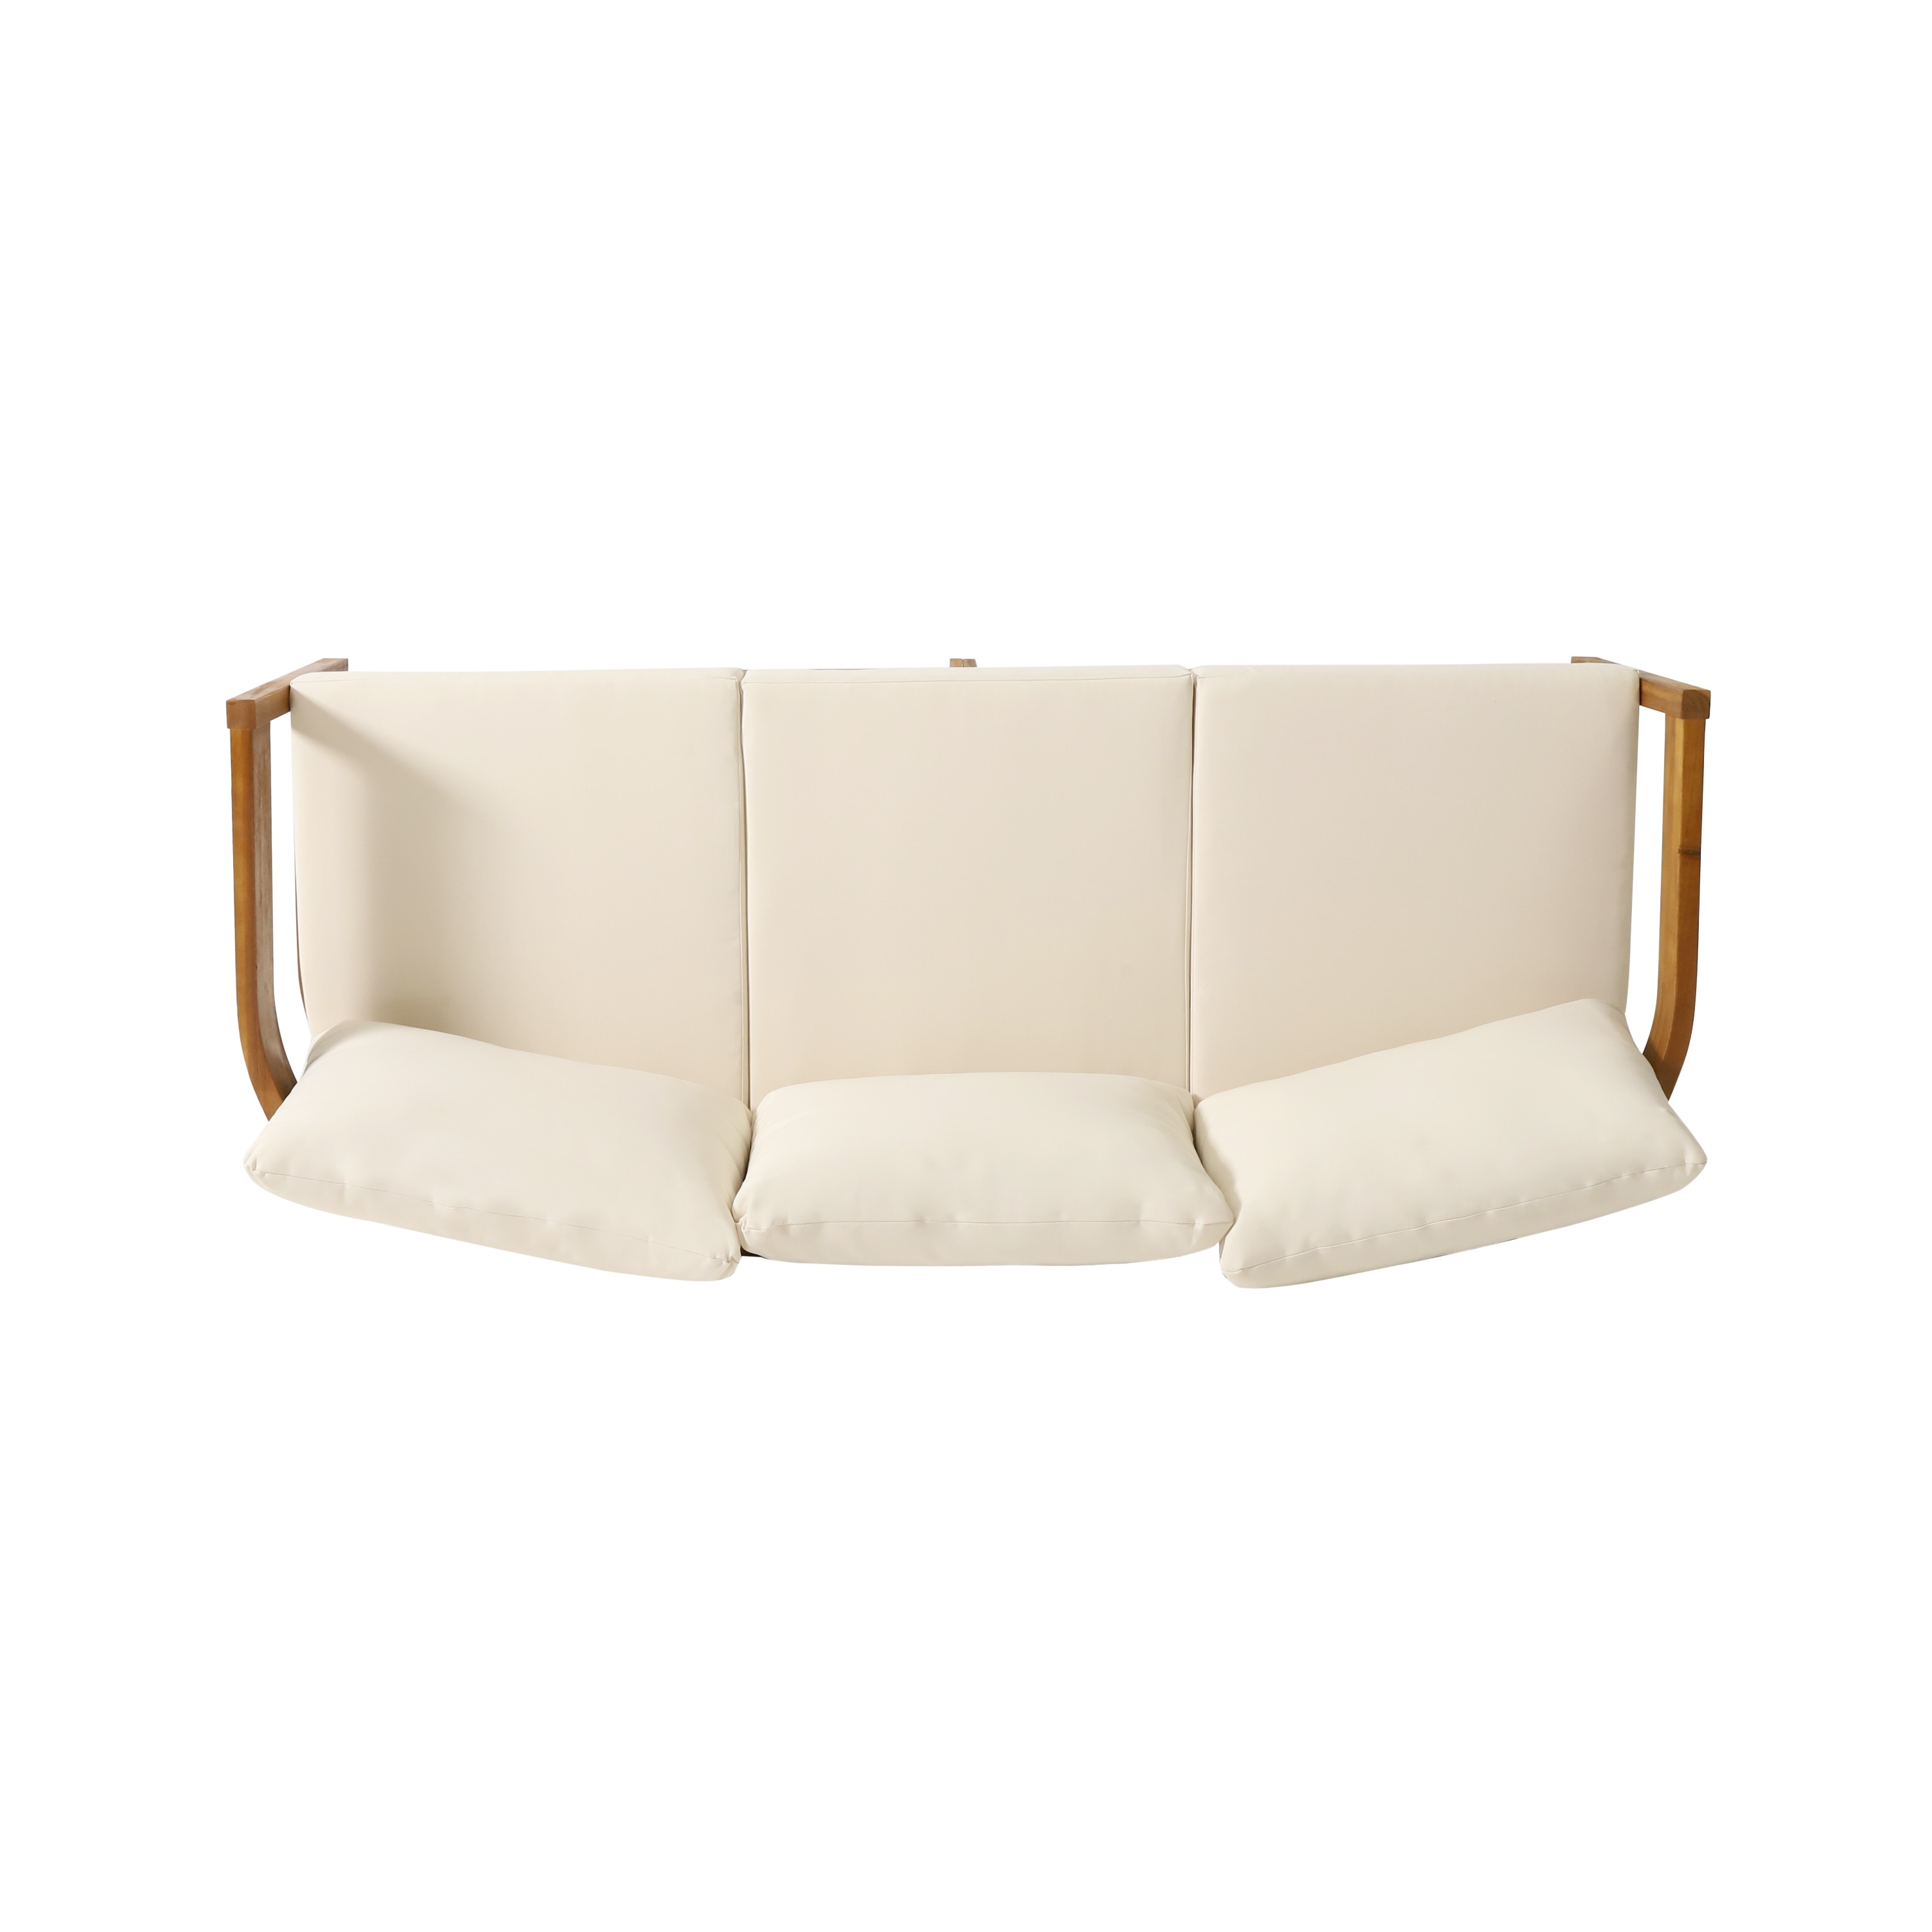 Brooklyn Outdoor Acacia Wood 3 Seater Sofa with Cushions by